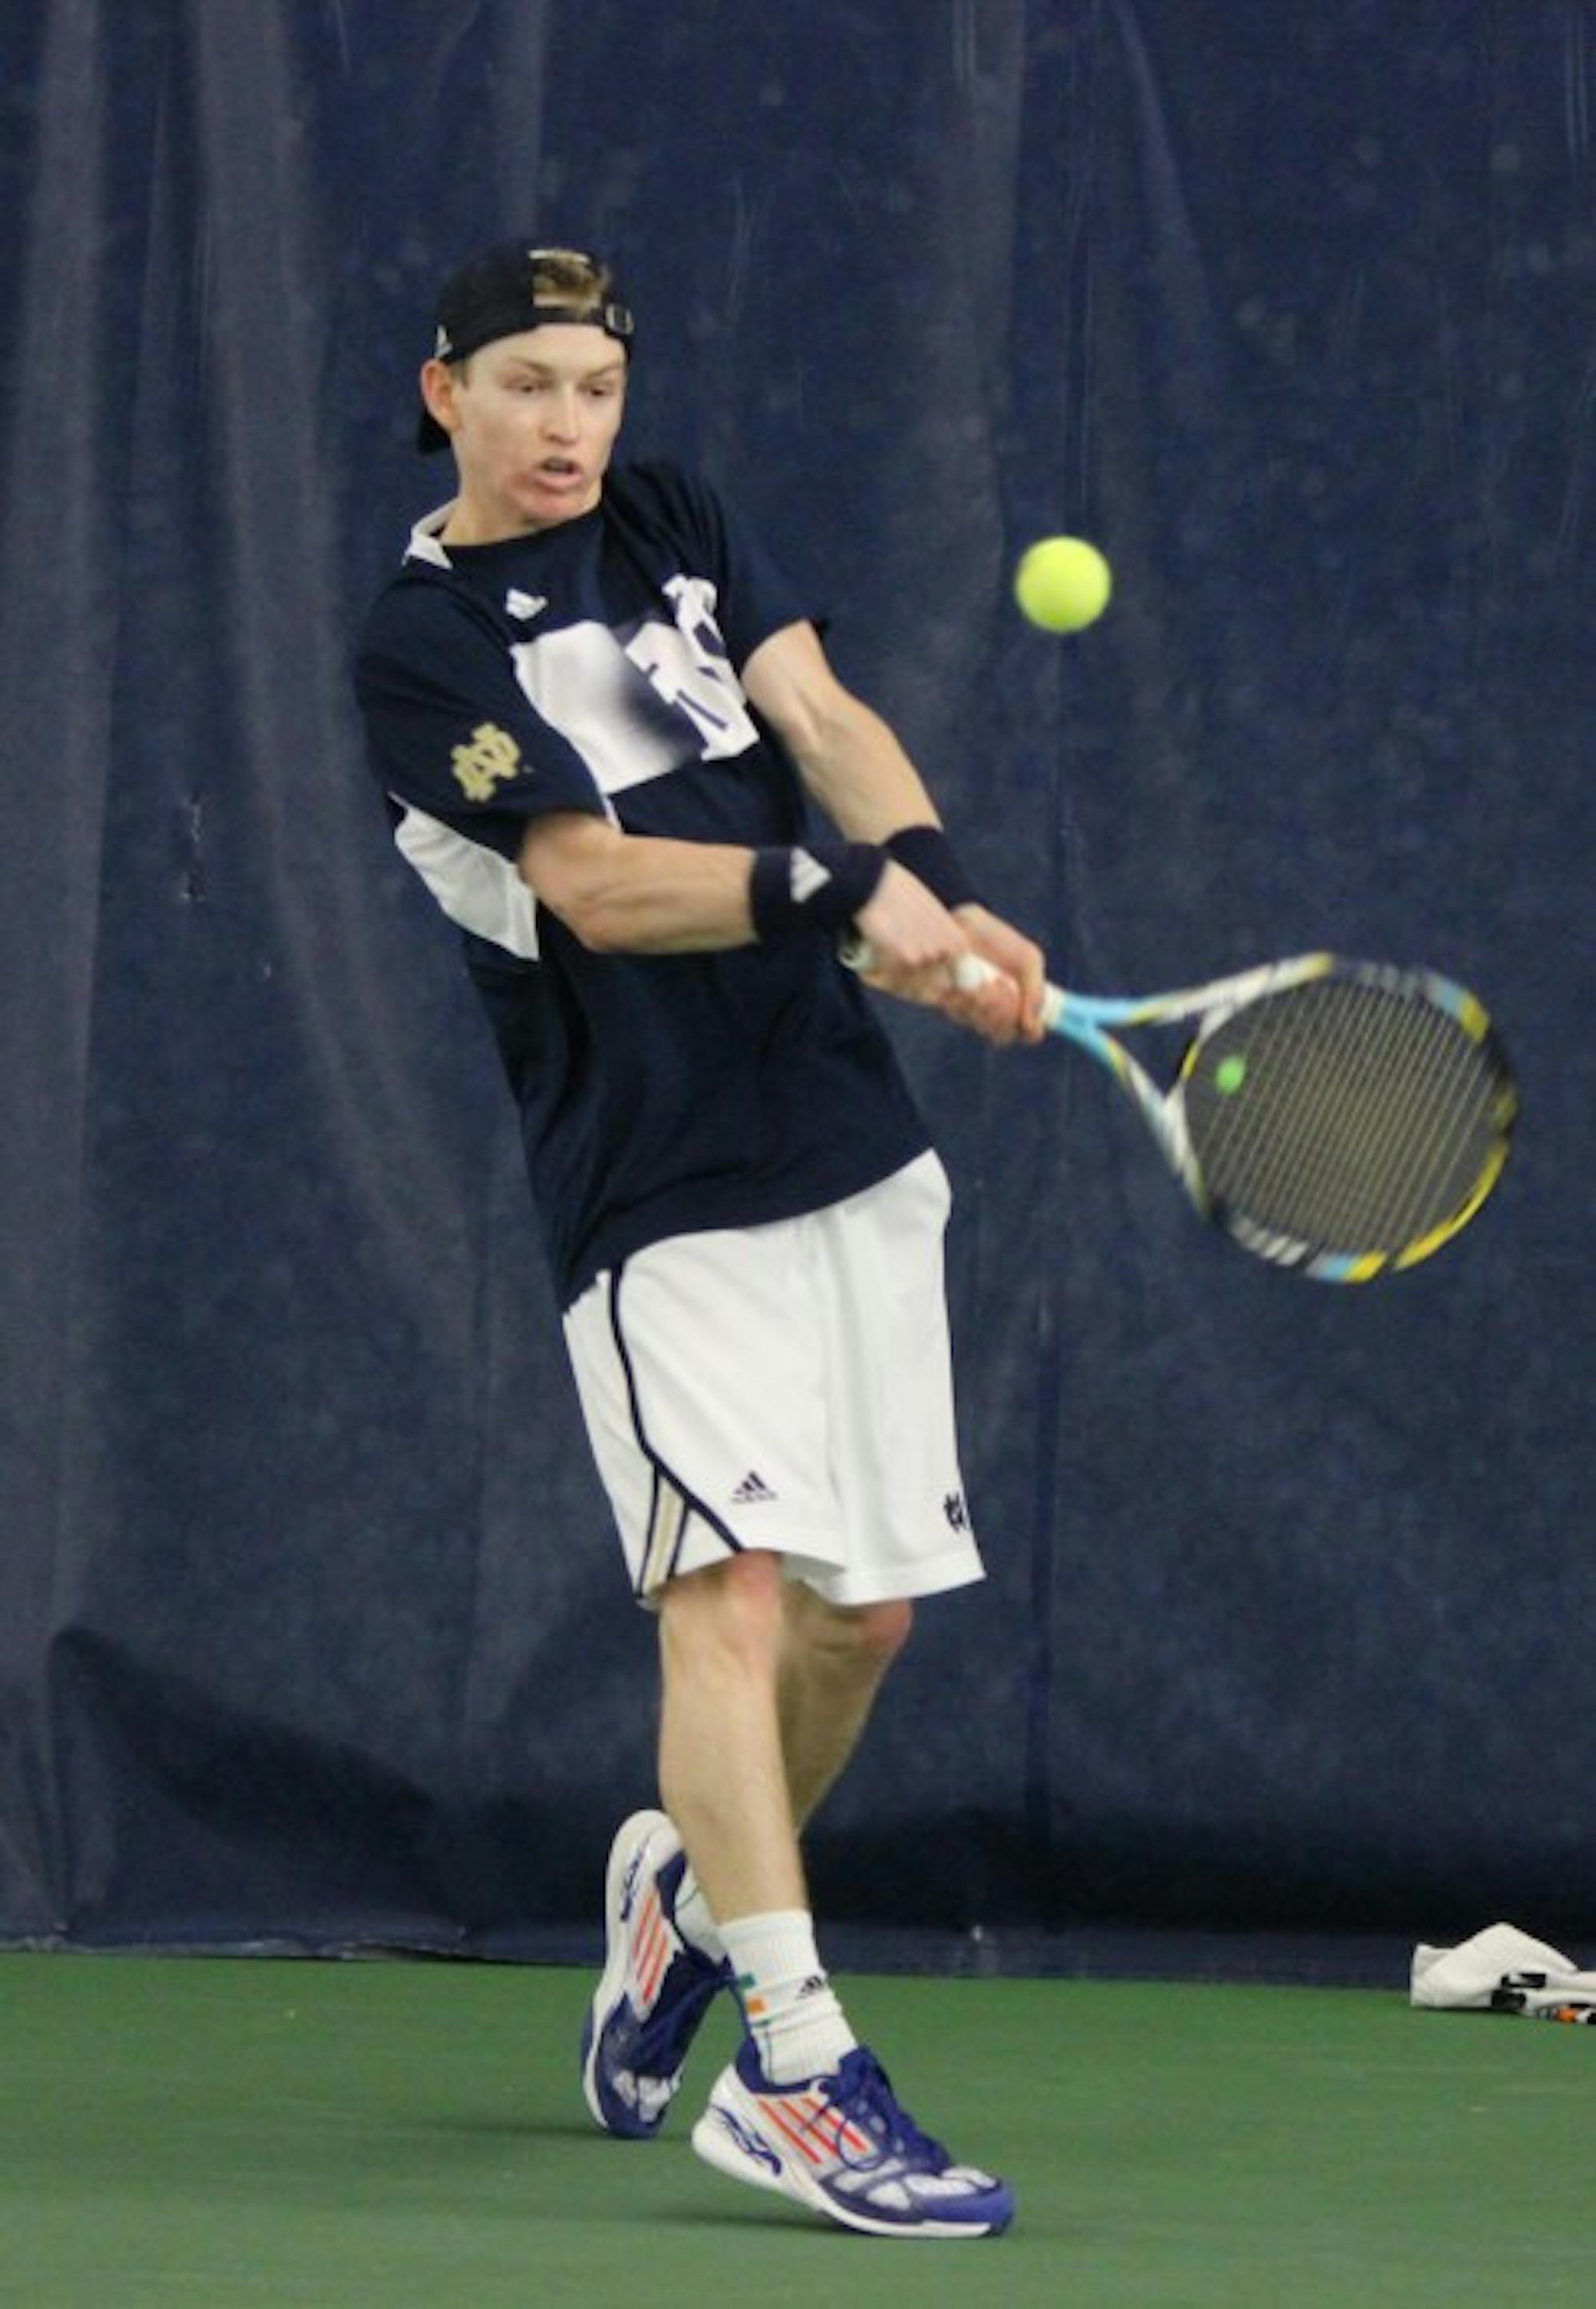 Irish sophomore Josh Hagar returns a backhand against Ohio State on Feb. 22 at the Eck Tennis Pavilion. Notre Dame lost the match 4-2.